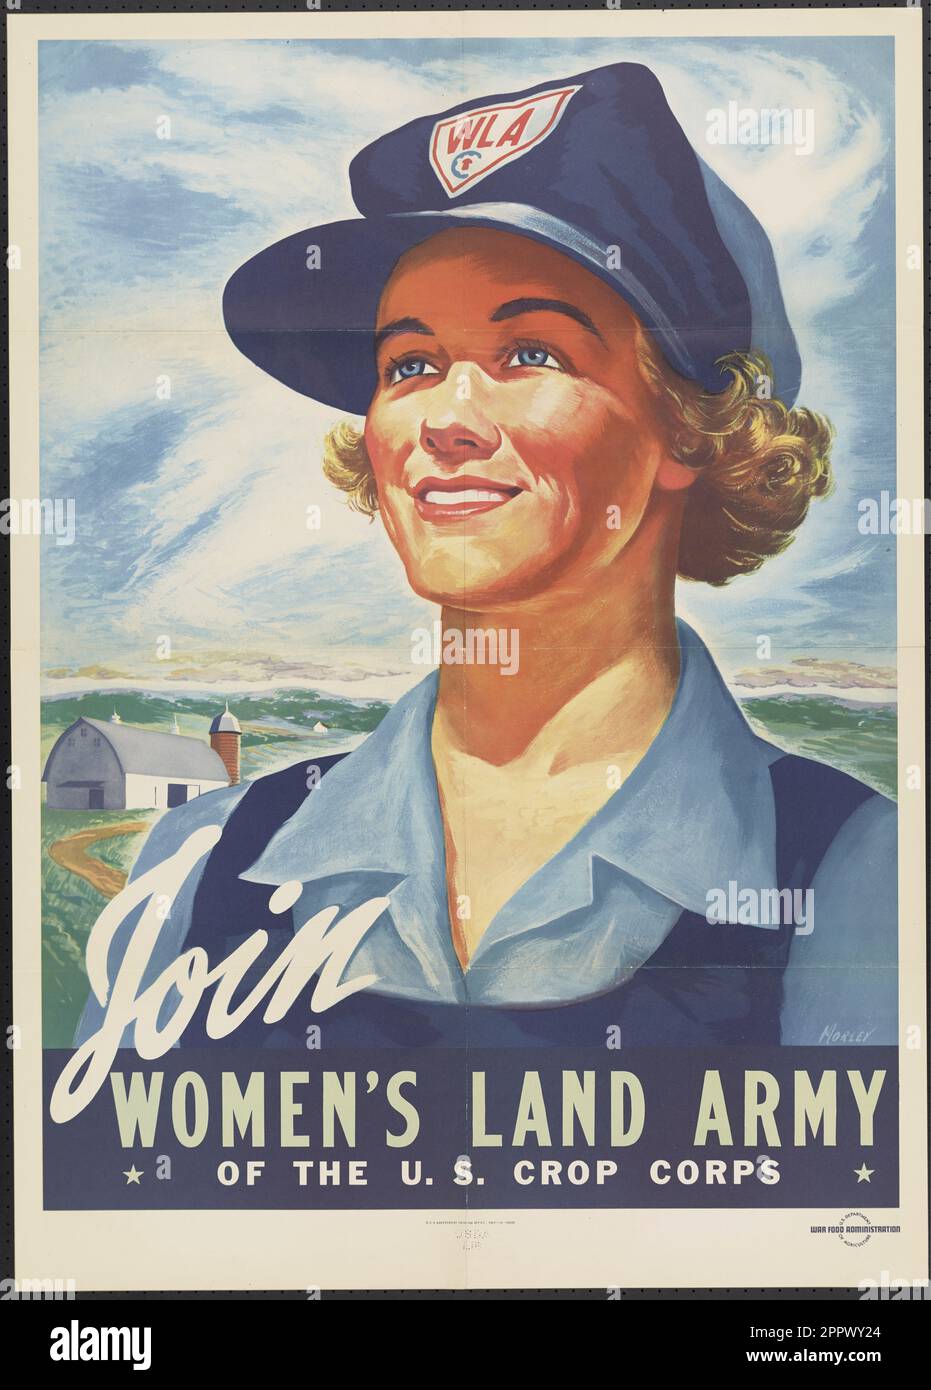 Join the Women's Land Army of the U.S. Crop Corps by Morley, Hubert Publication date 1943 Stock Photo